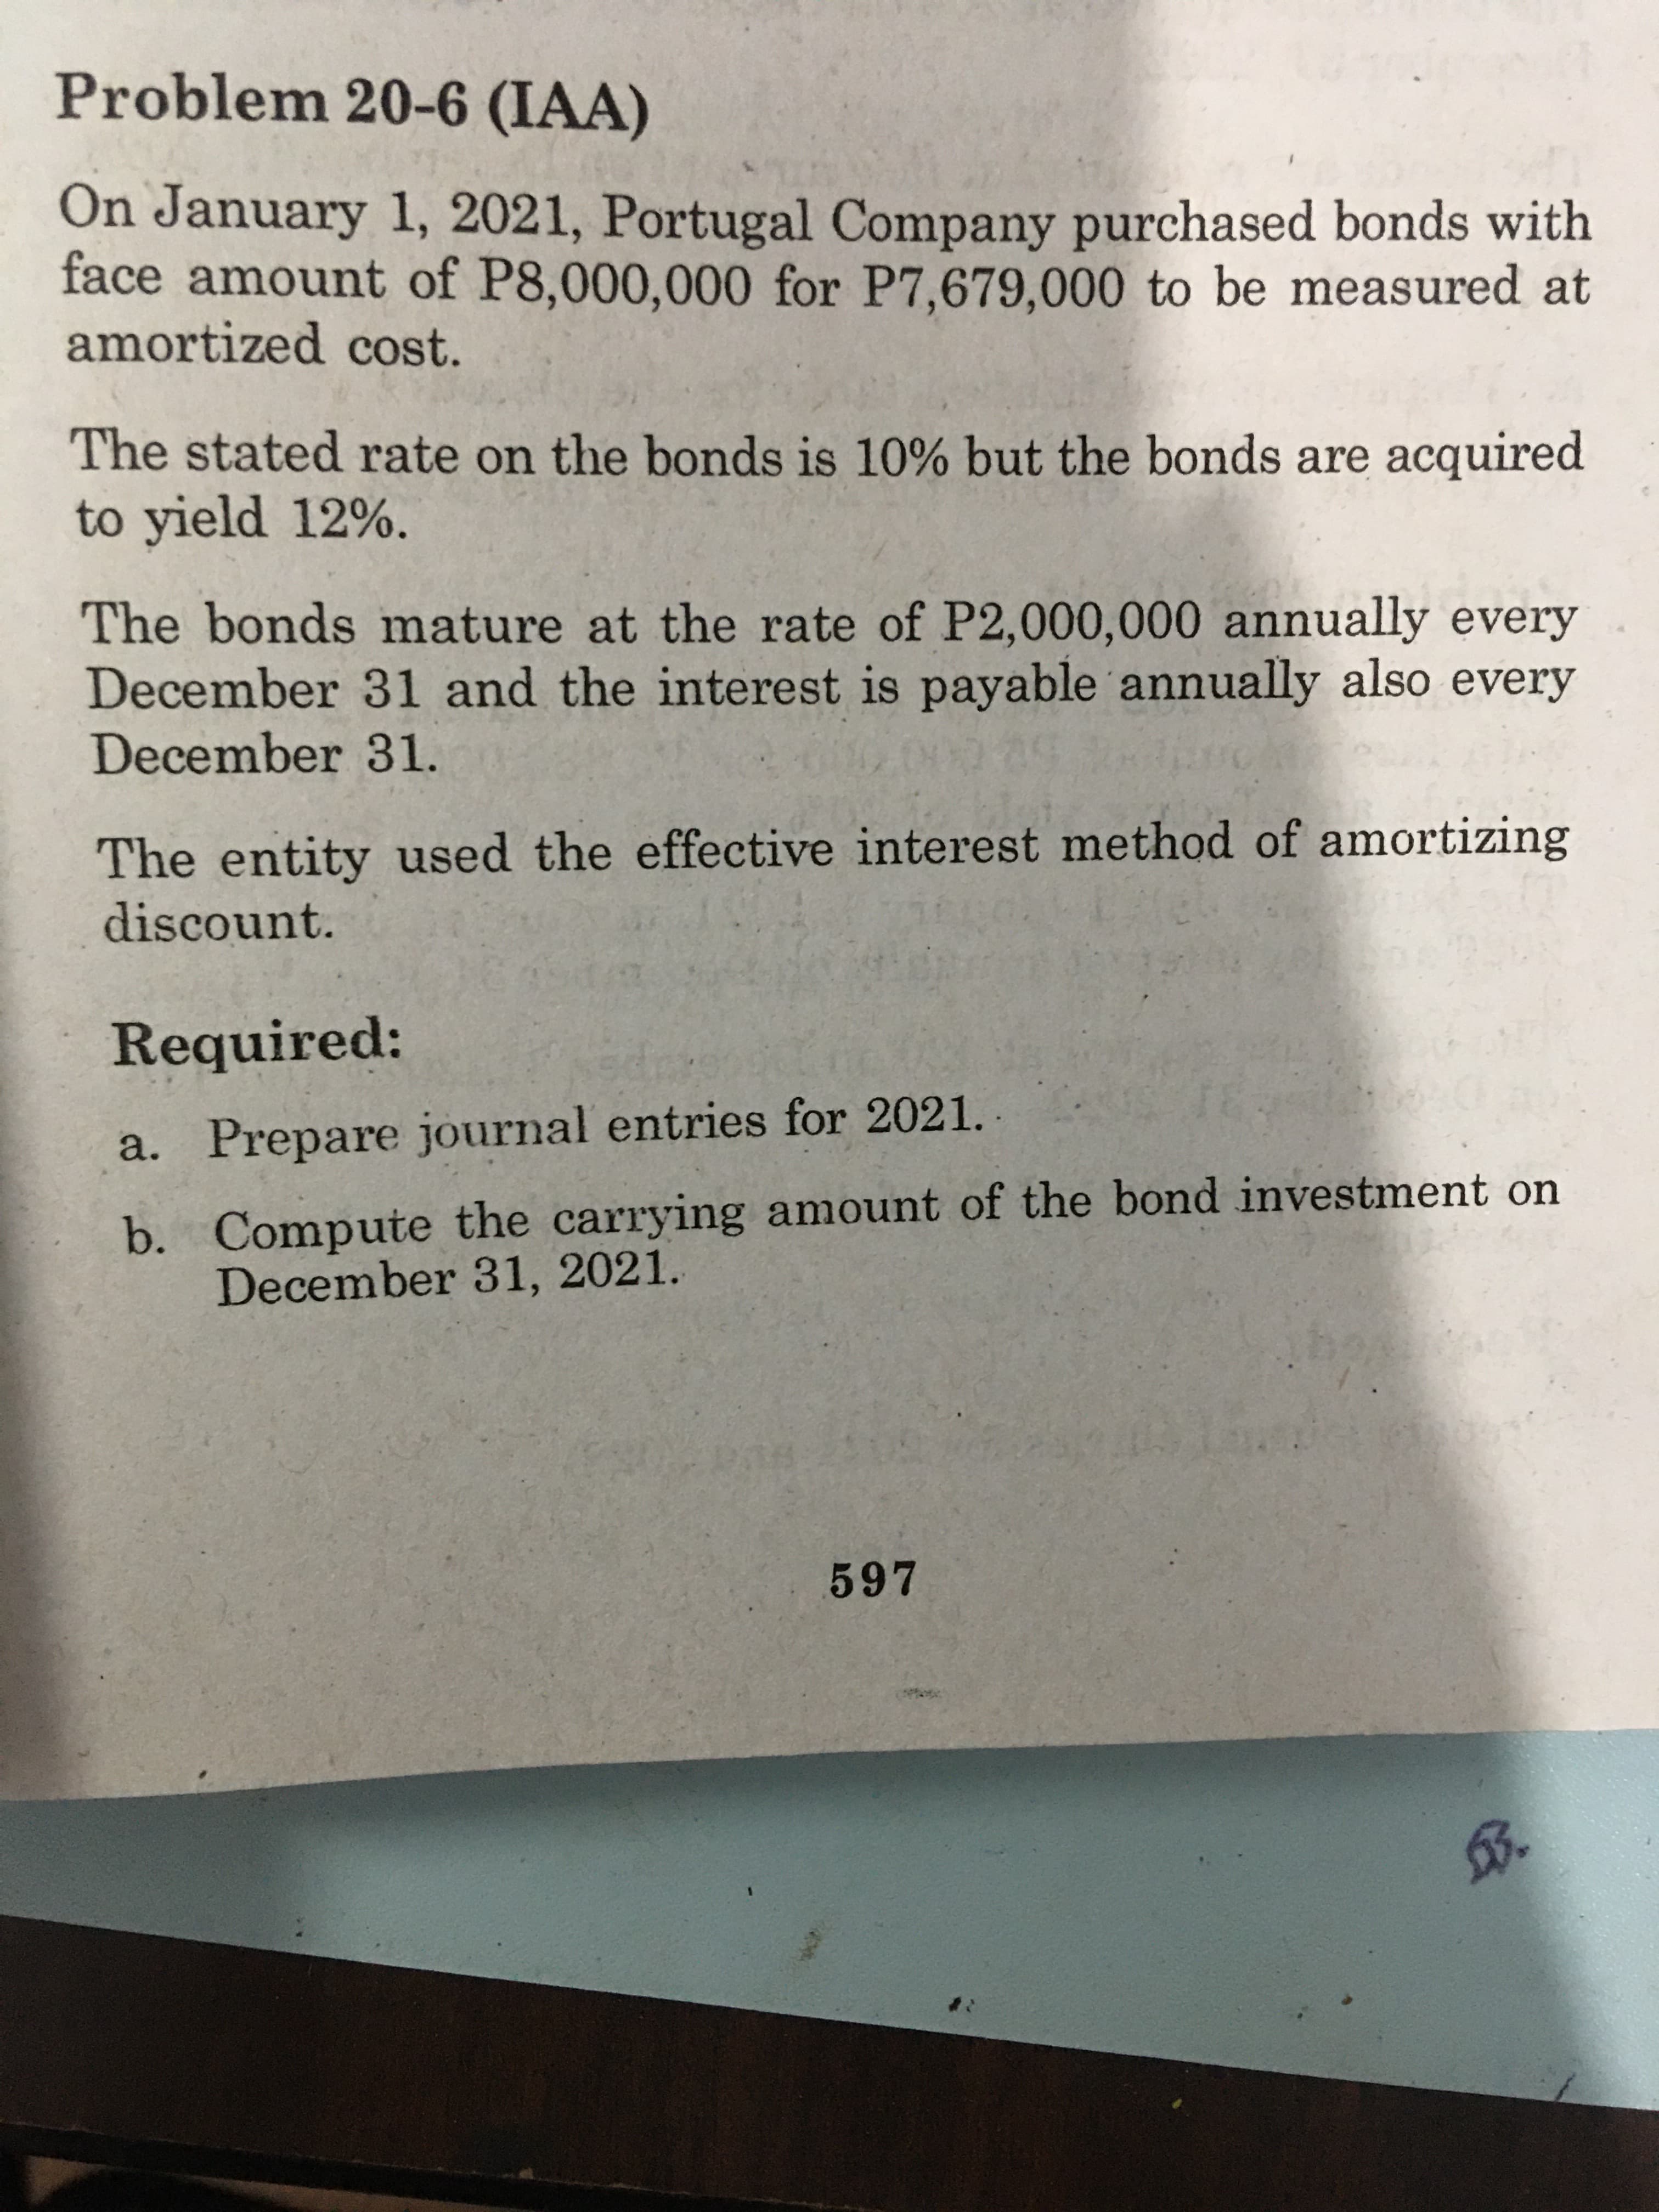 Problem 20-6 (IAA)
On January 1, 2021, Portugal Company purchased bonds with
face amount of P8,000,000 for P7,679,000 to be measured at
amortized cost.
The stated rate on the bonds is 10% but the bonds are acquired
to yield 12%.
The bonds mature at the rate of P2,000,000 annually every
December 31 and the interest is payable annually also every
December 31.
The entity used the effective interest method of amortizing
discount.
Required:
a. Prepare journal entries for 2021.
b. Compute the carrying amount of the bond investment on
December 31, 2021.
597
